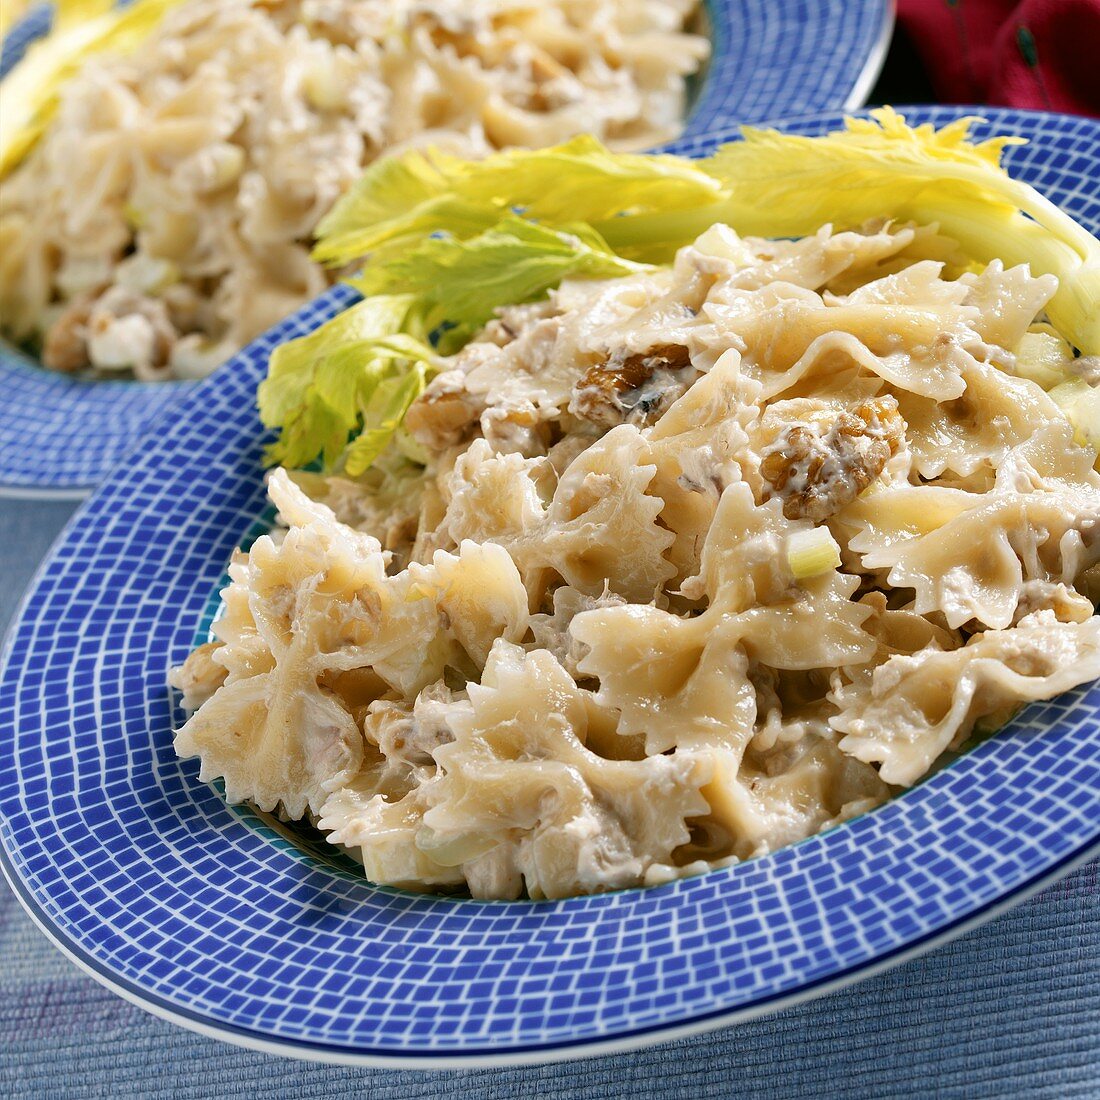 Pasta salad with tuna and celery